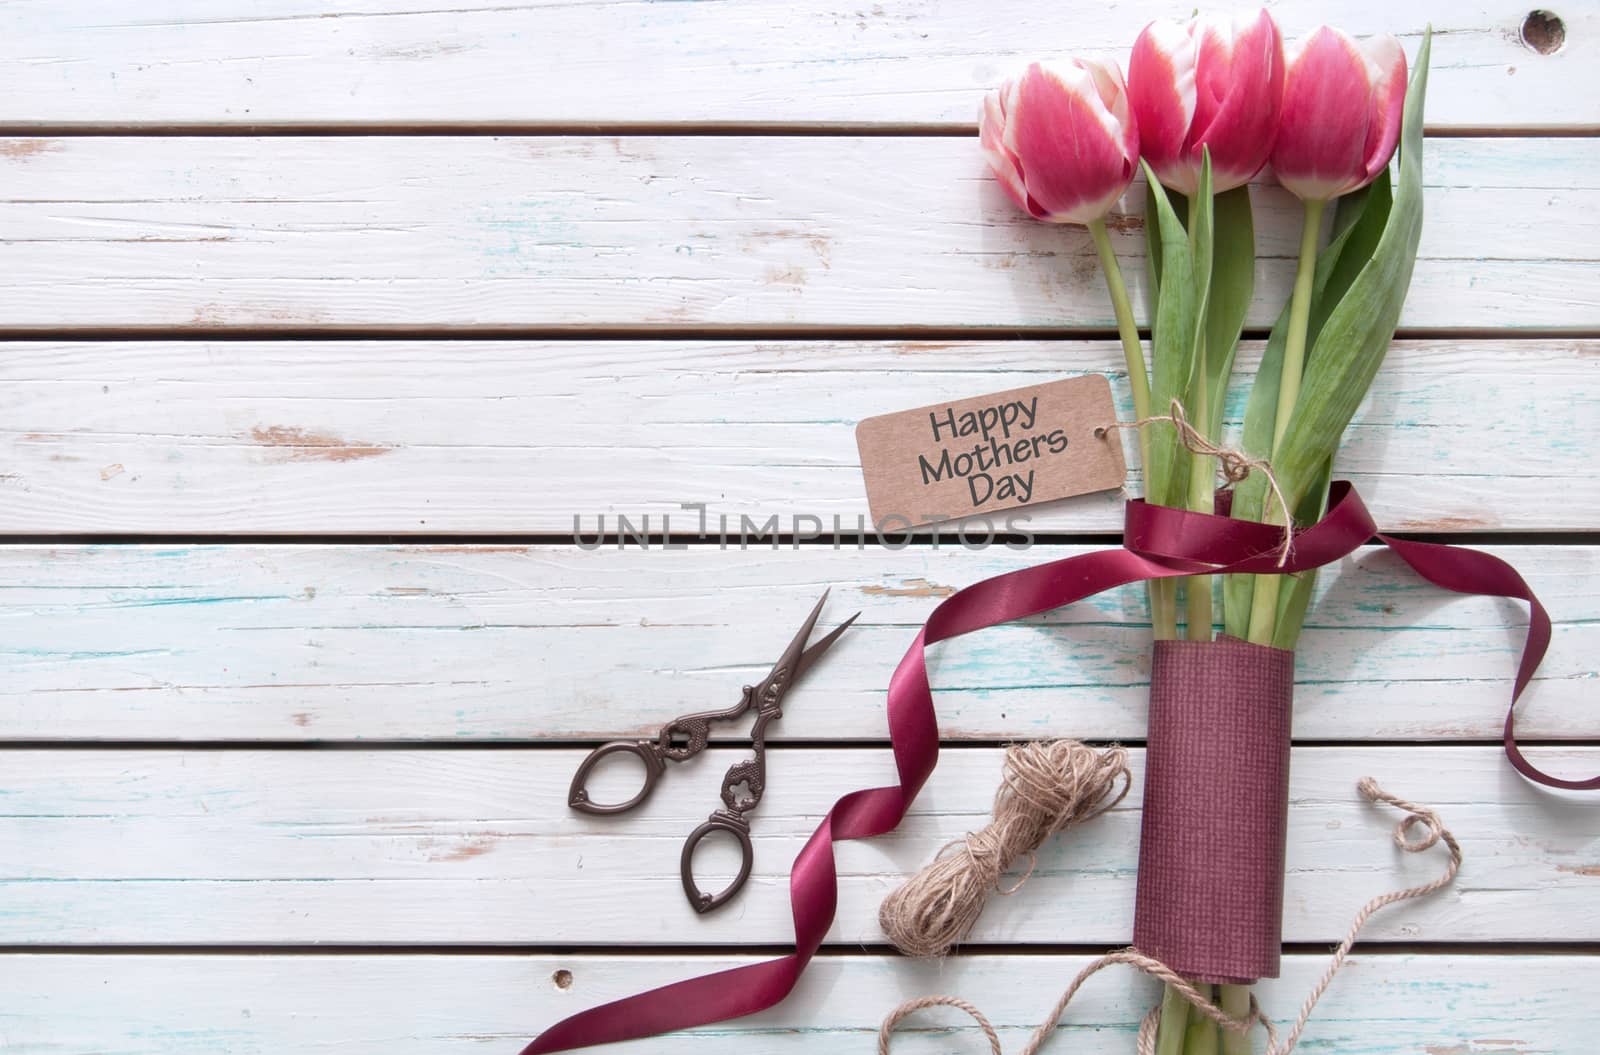 Tulips on a wooden background wtih gift tag